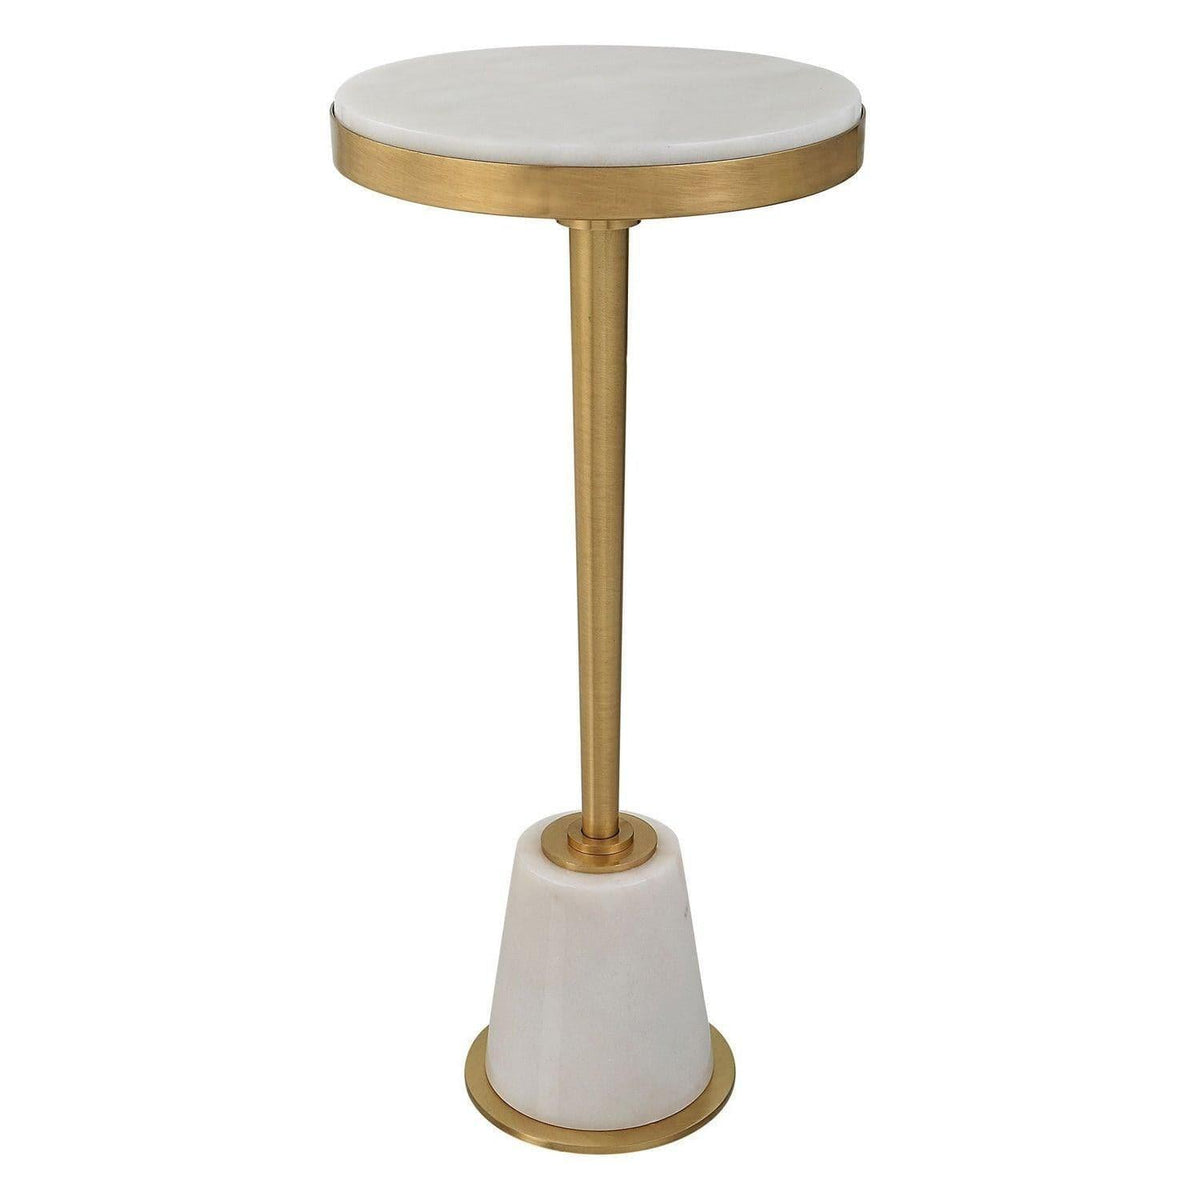 The Uttermost - Edifice Drink Table - 25177 | Montreal Lighting & Hardware